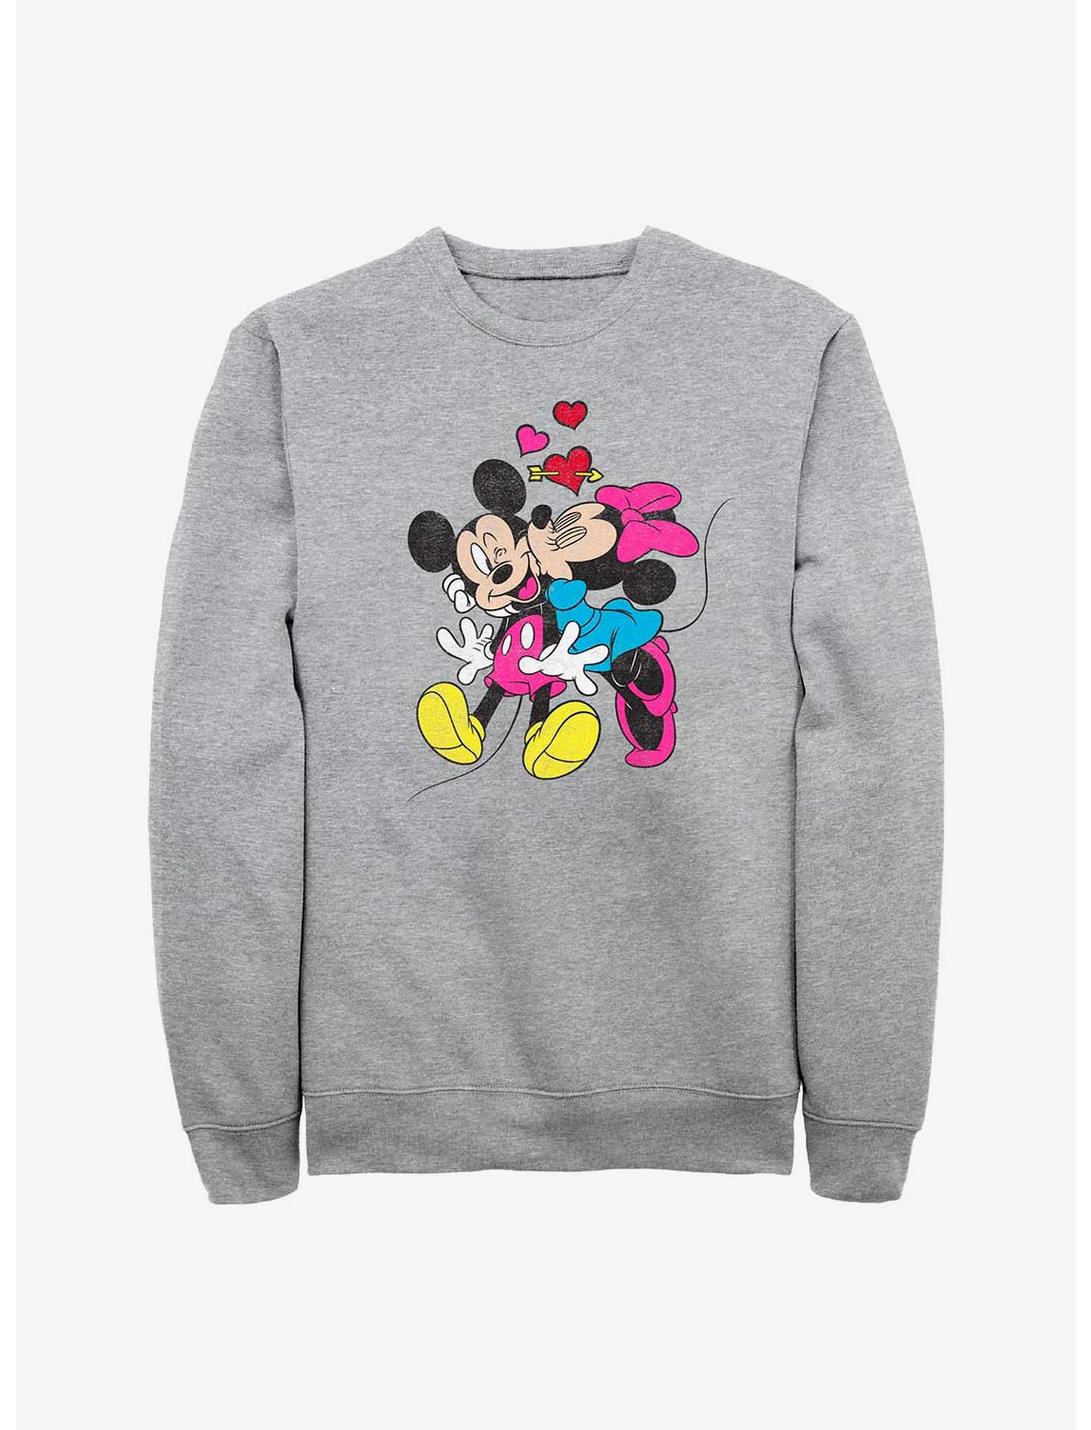 Disney Mickey Mouse & Minnie Mouse Love Sweatshirt, ATH HTR, hi-res